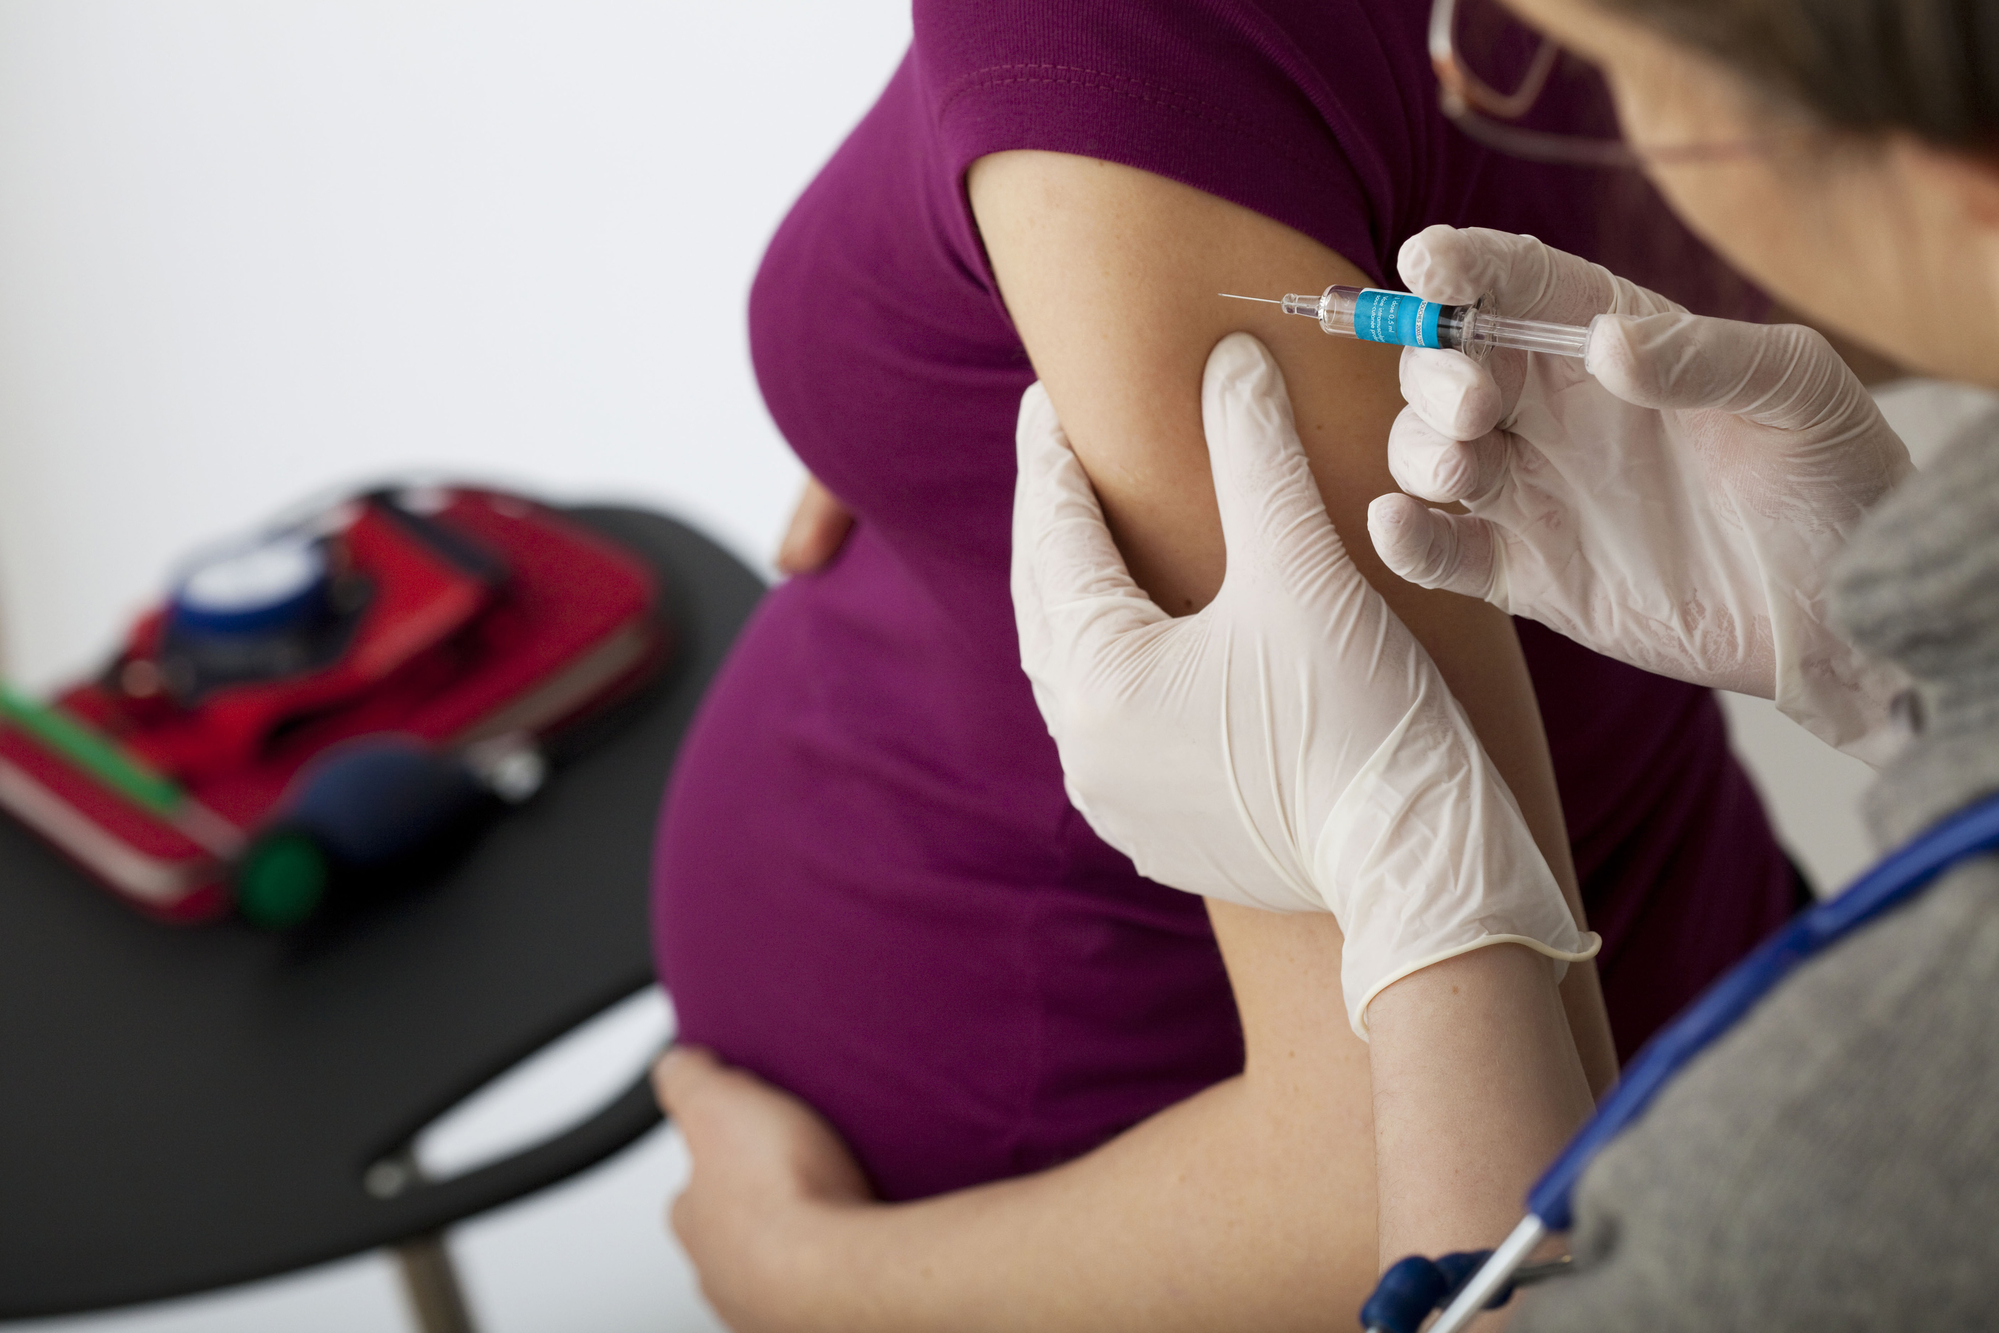 There is no evidence that flu vaccines cause miscarriages